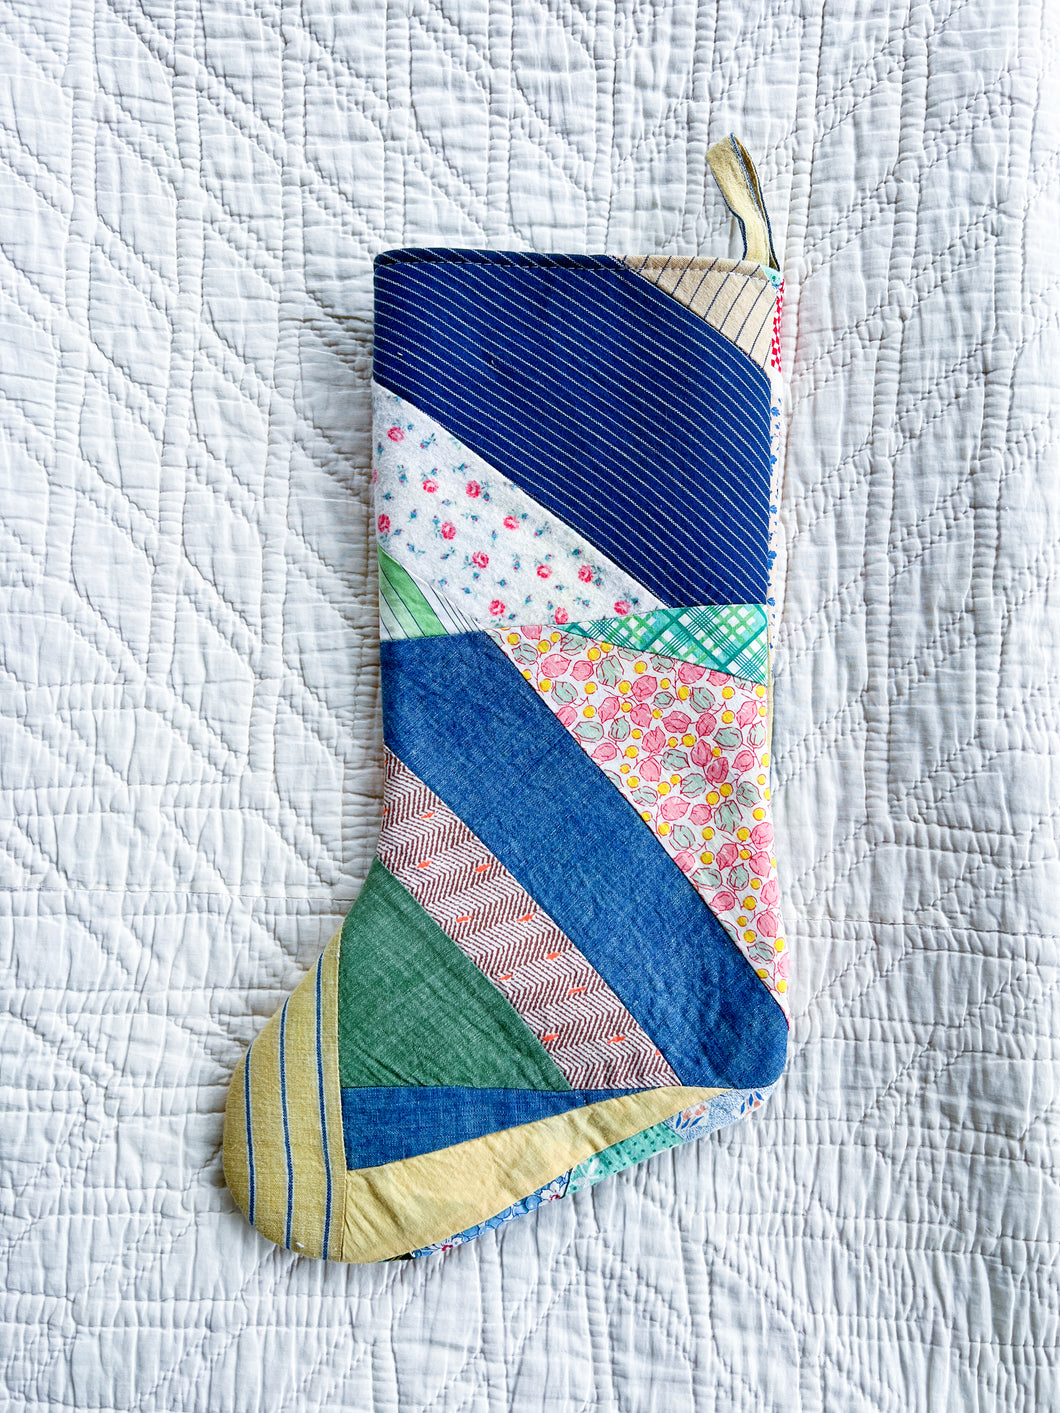 One-of-a-Kind: Scrappy Feedsack Stocking #1